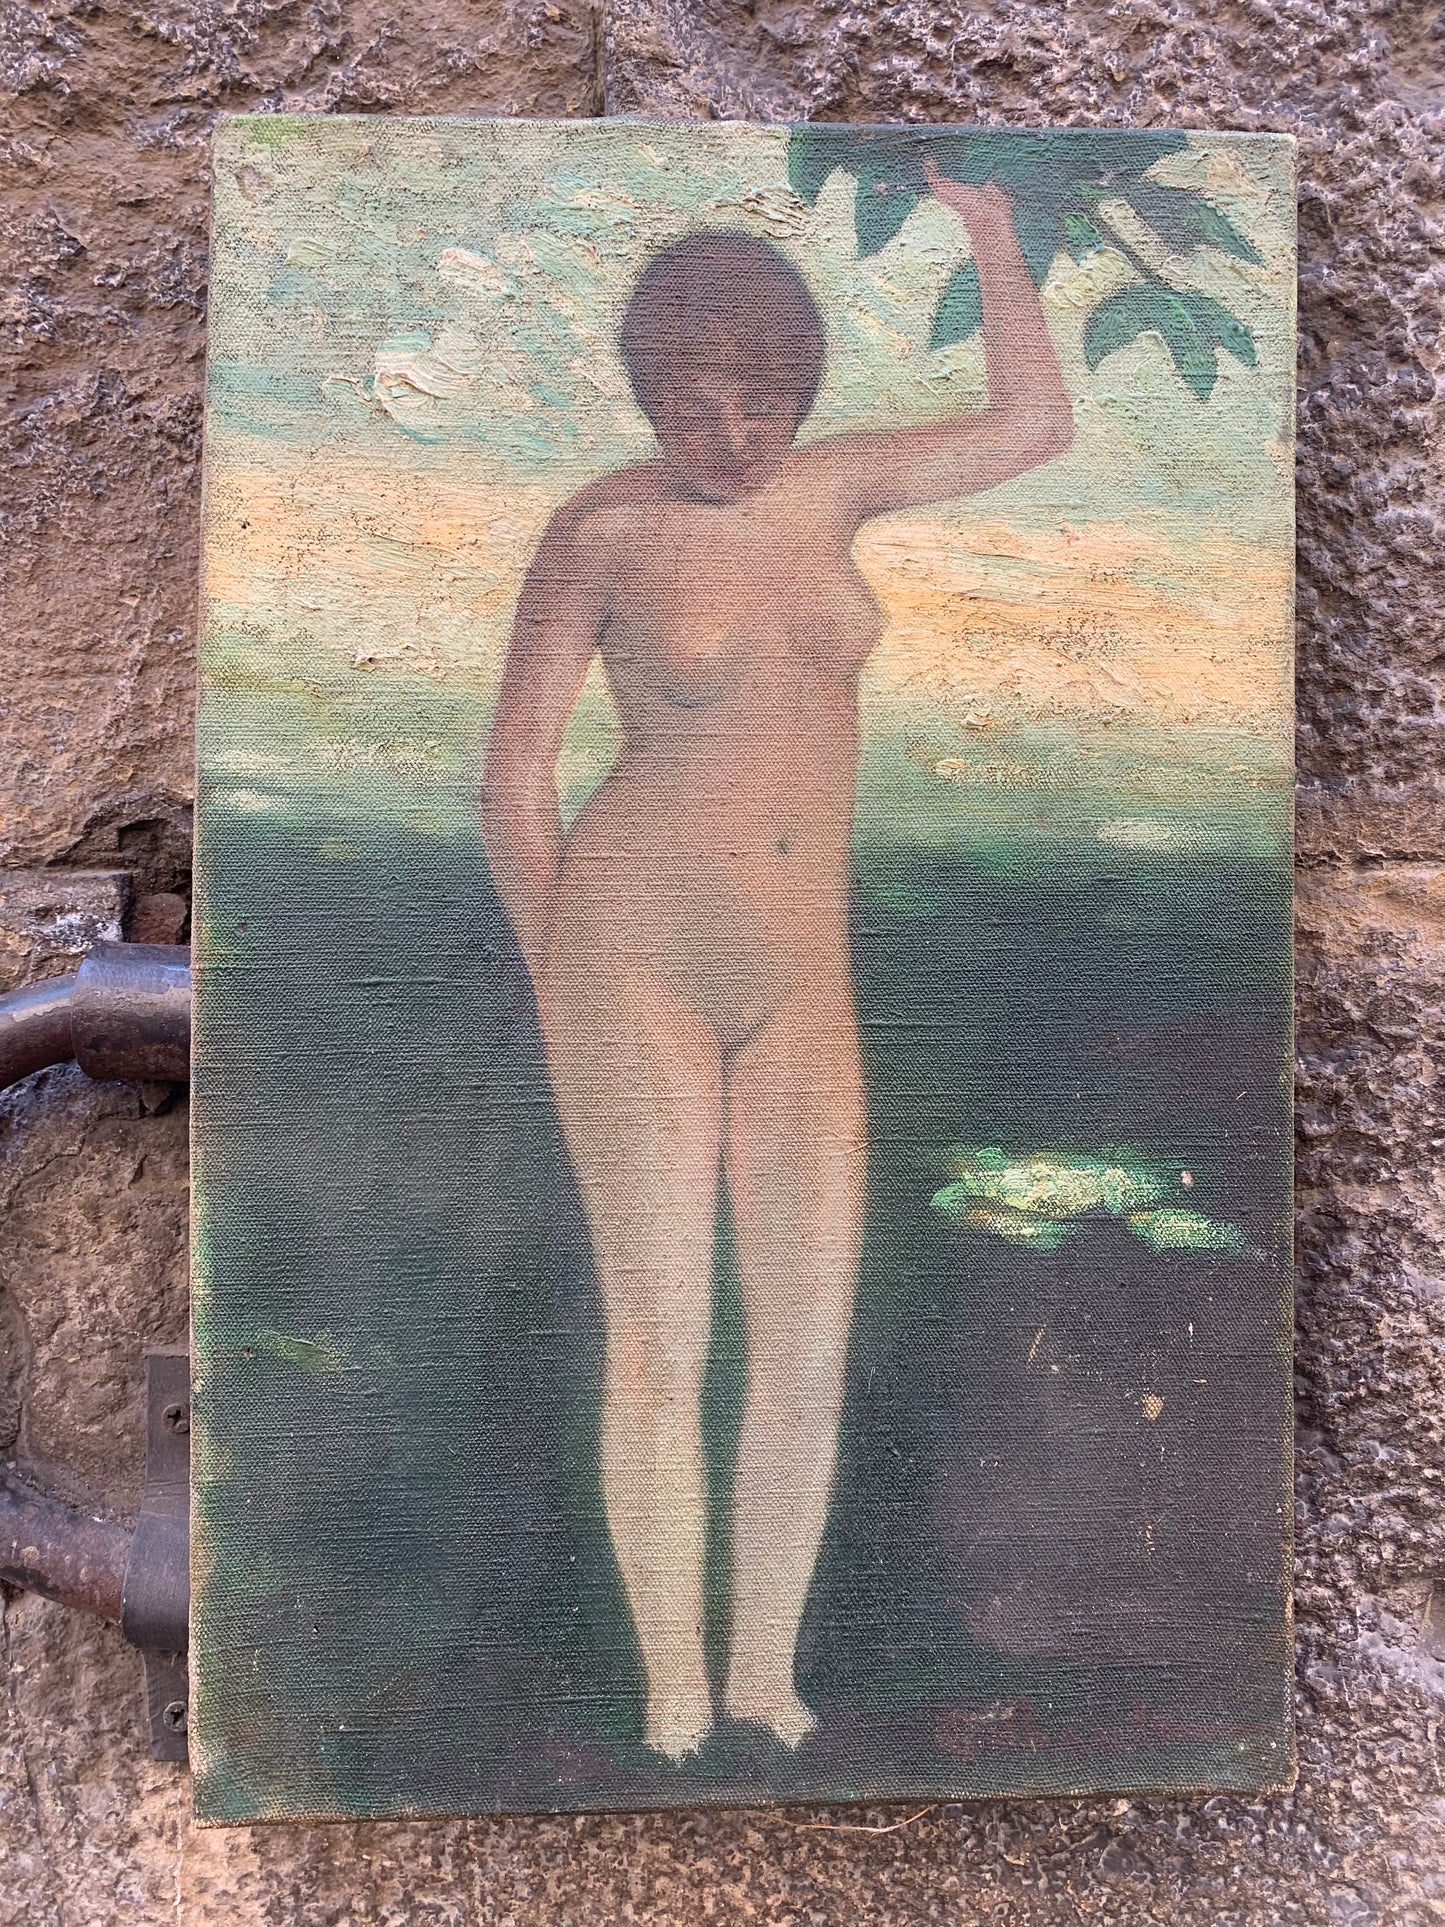 Symbolist painting.  "The nude of a woman" around 1890.